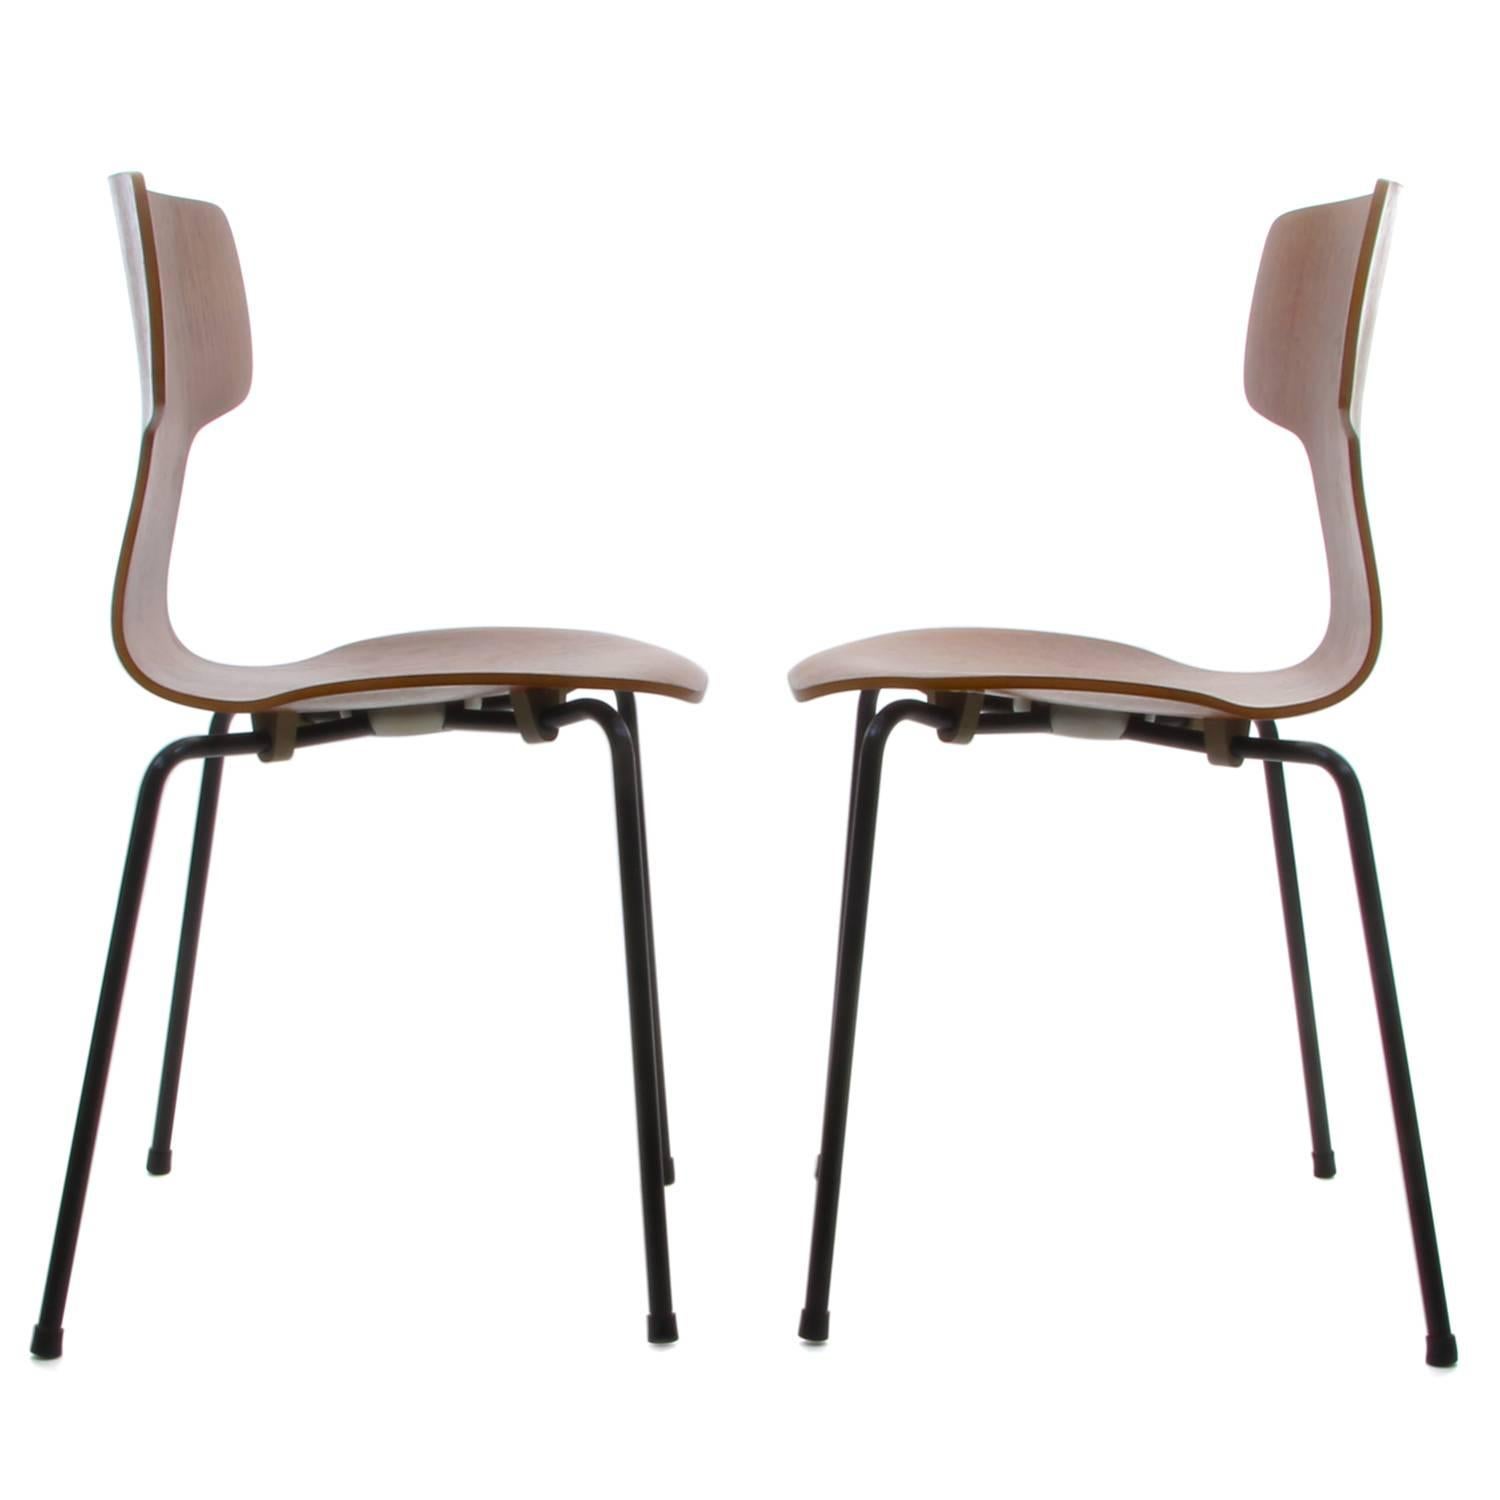 Danish Two Teak T-Chairs, Model 3103 Dining Chairs by Arne Jacobsen, Fritz Hansen, 1955 For Sale